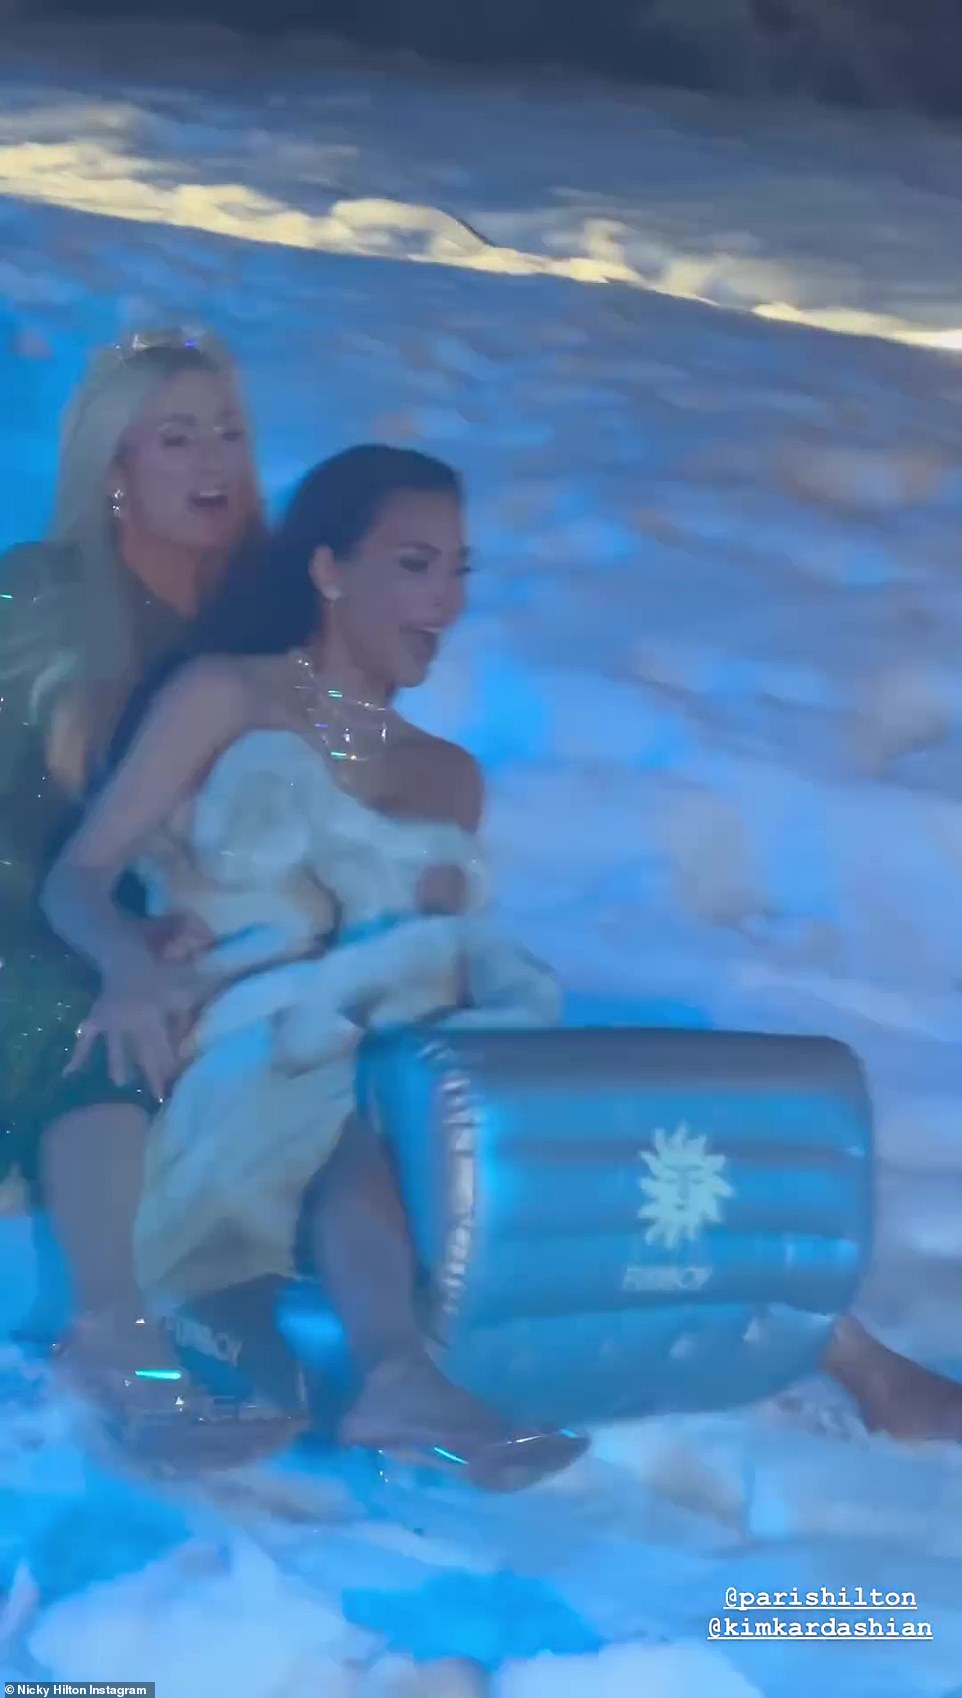 Kim Kardashian and Paris Hilton rode a sled over tons of fake snow at the annual Kardashian-Jenner Christmas Eve party on Sunday evening